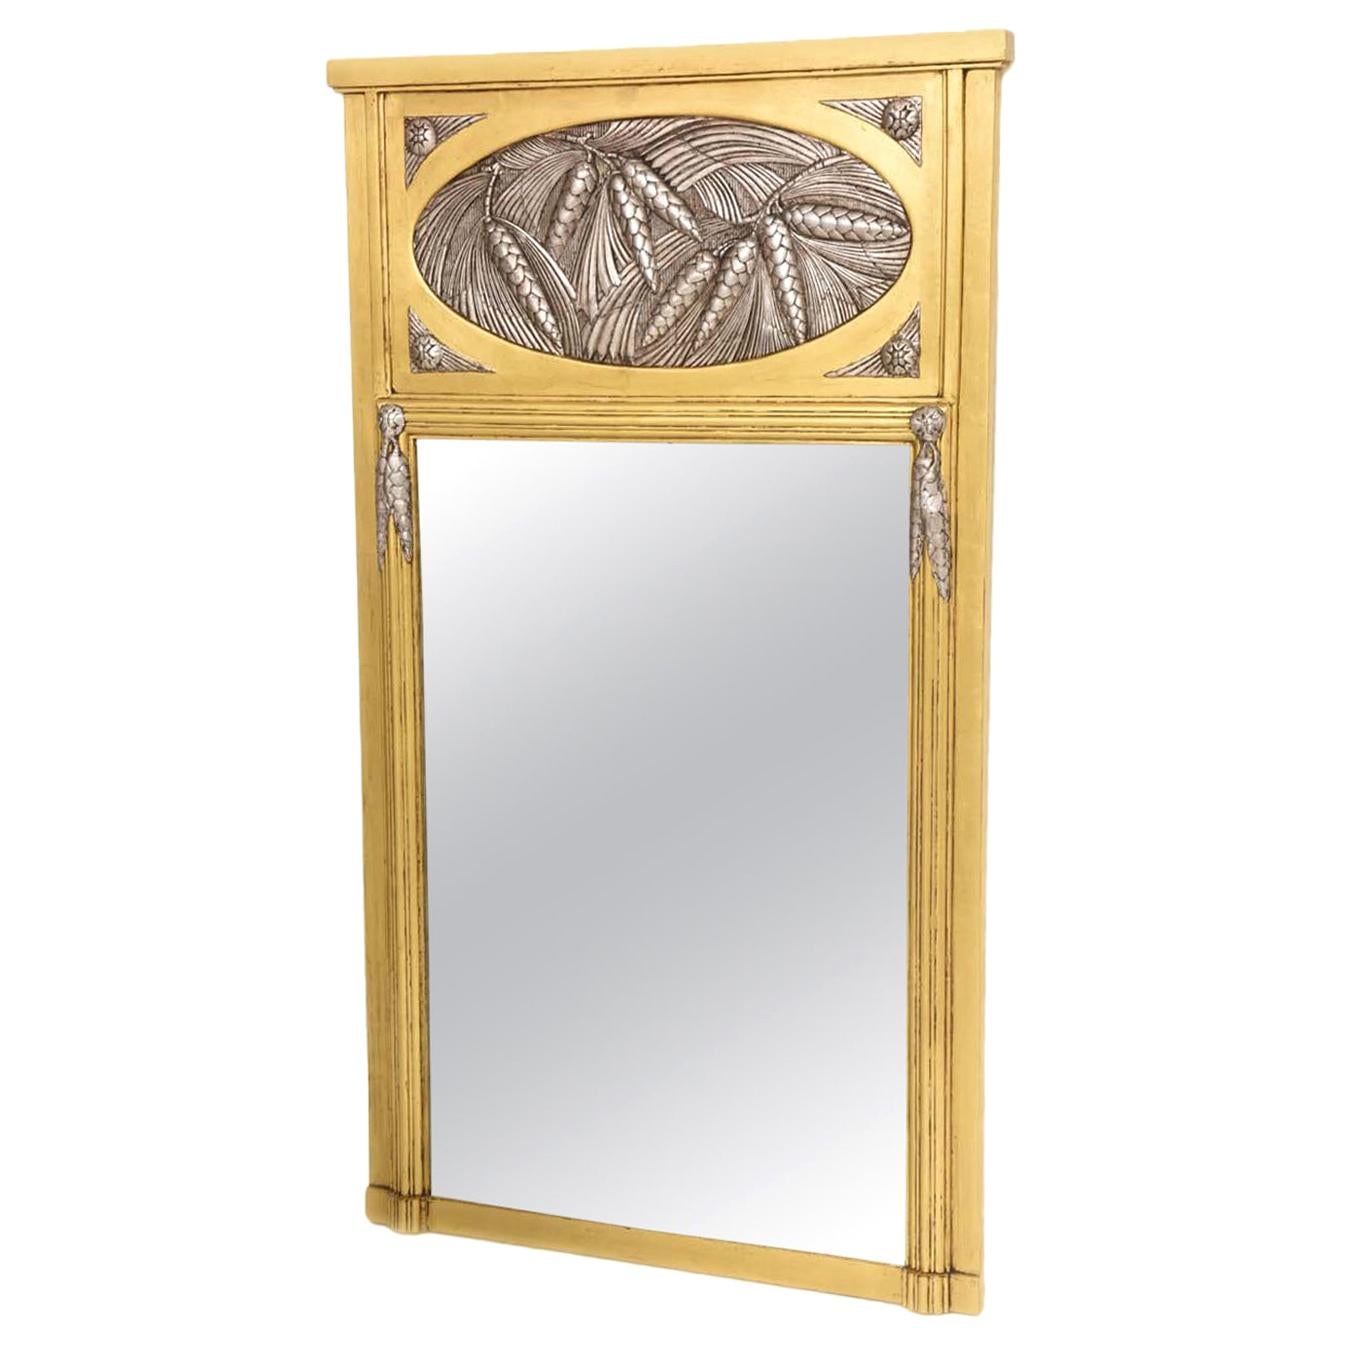 French Art Deco Trumeau Mirror in Gold and Silver Leaf